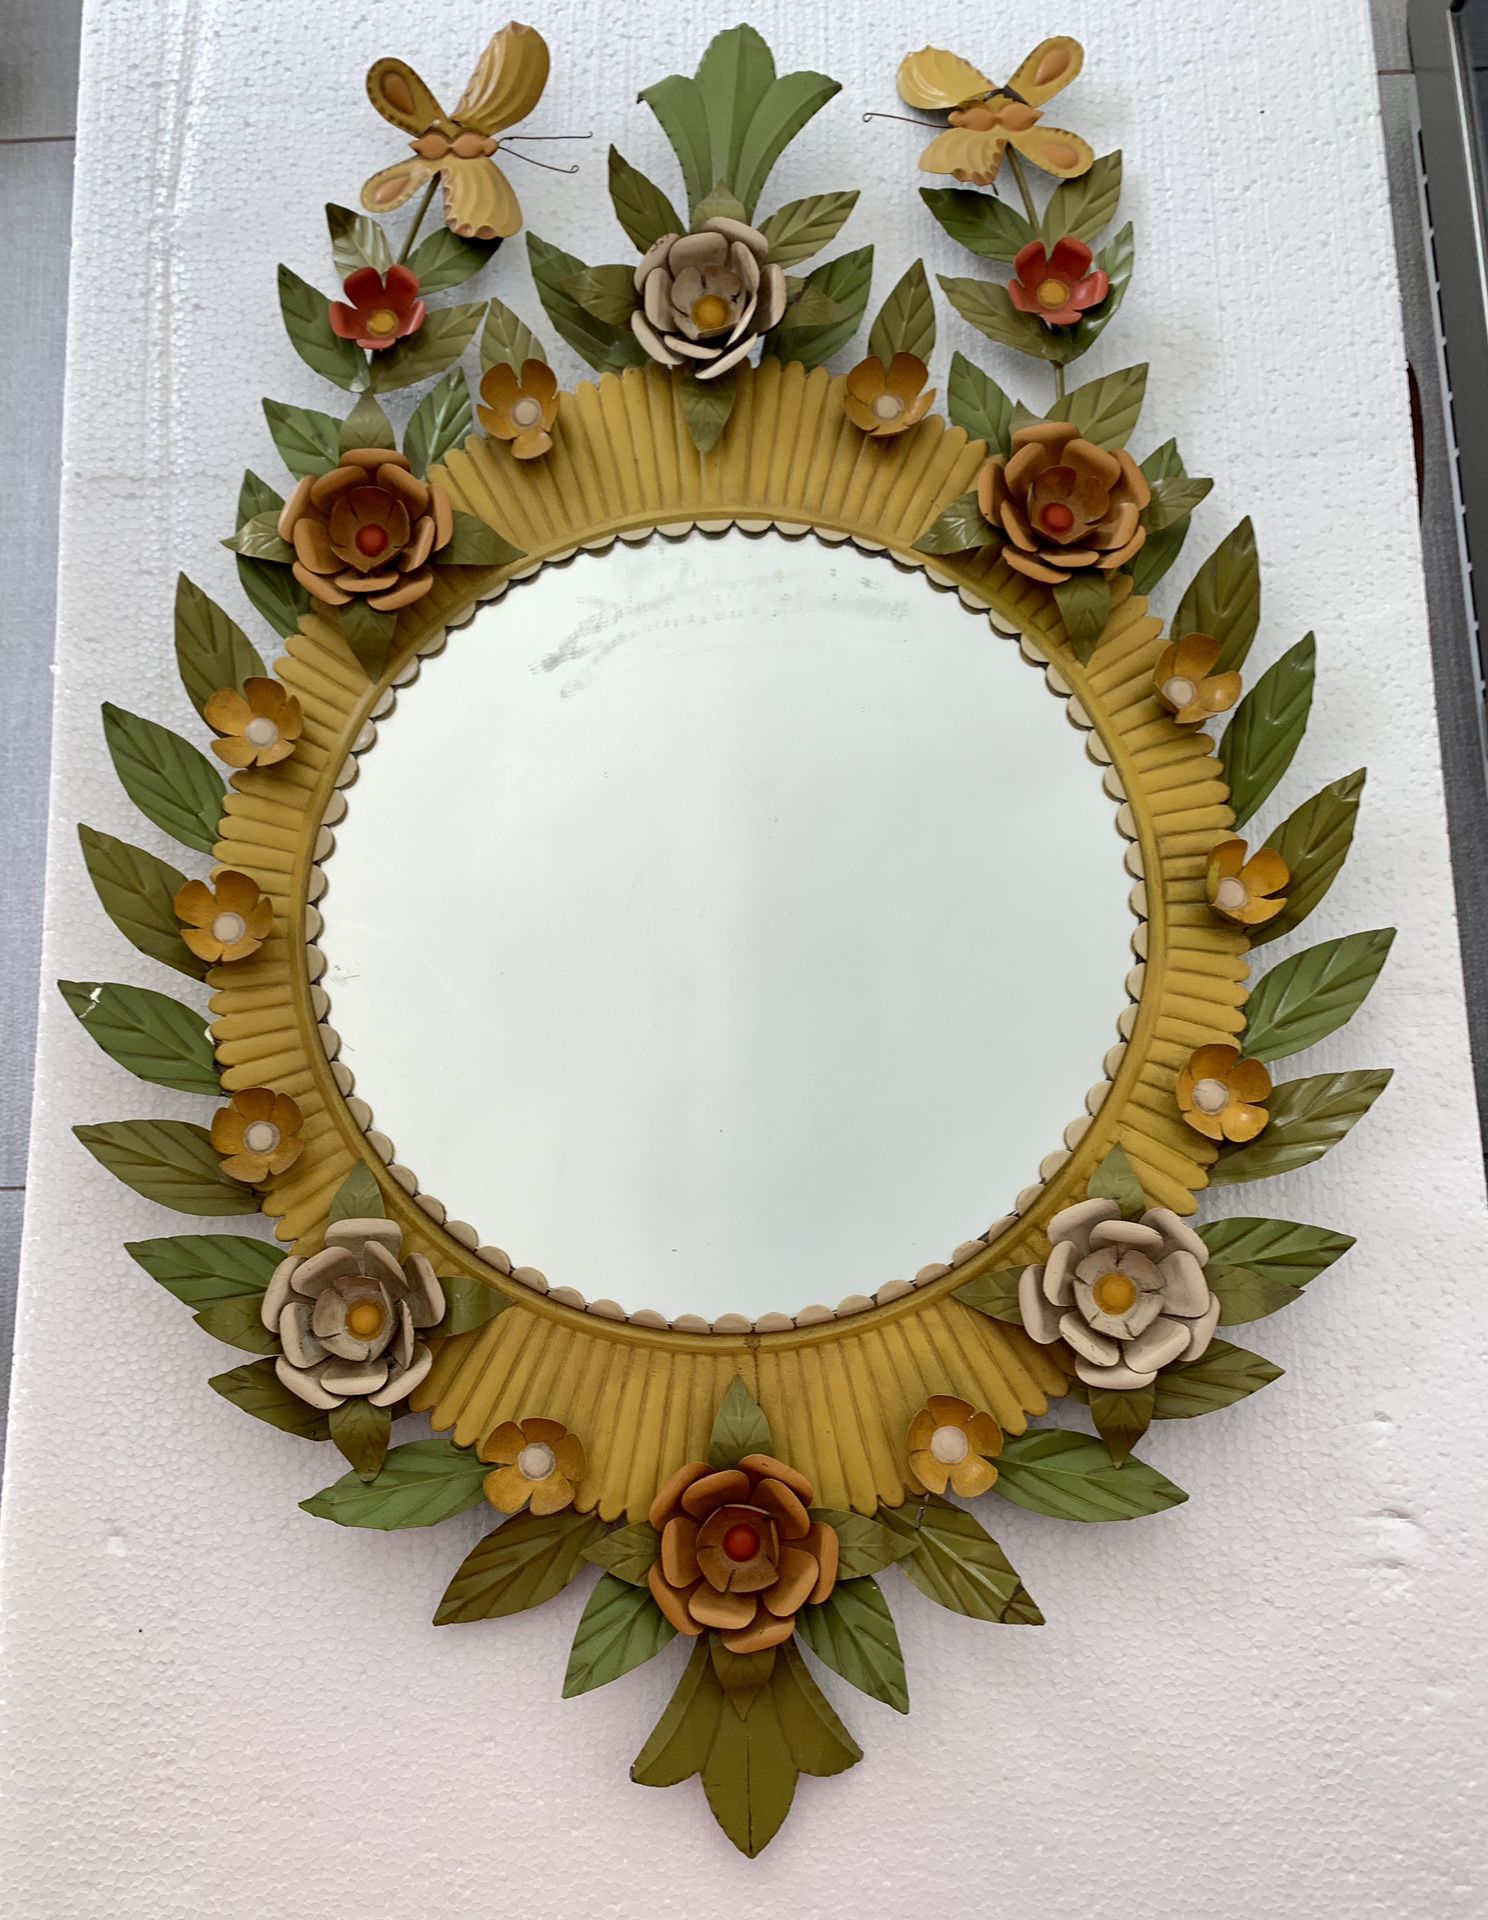 Vintage enameled tin mirror with flowers and butterflies